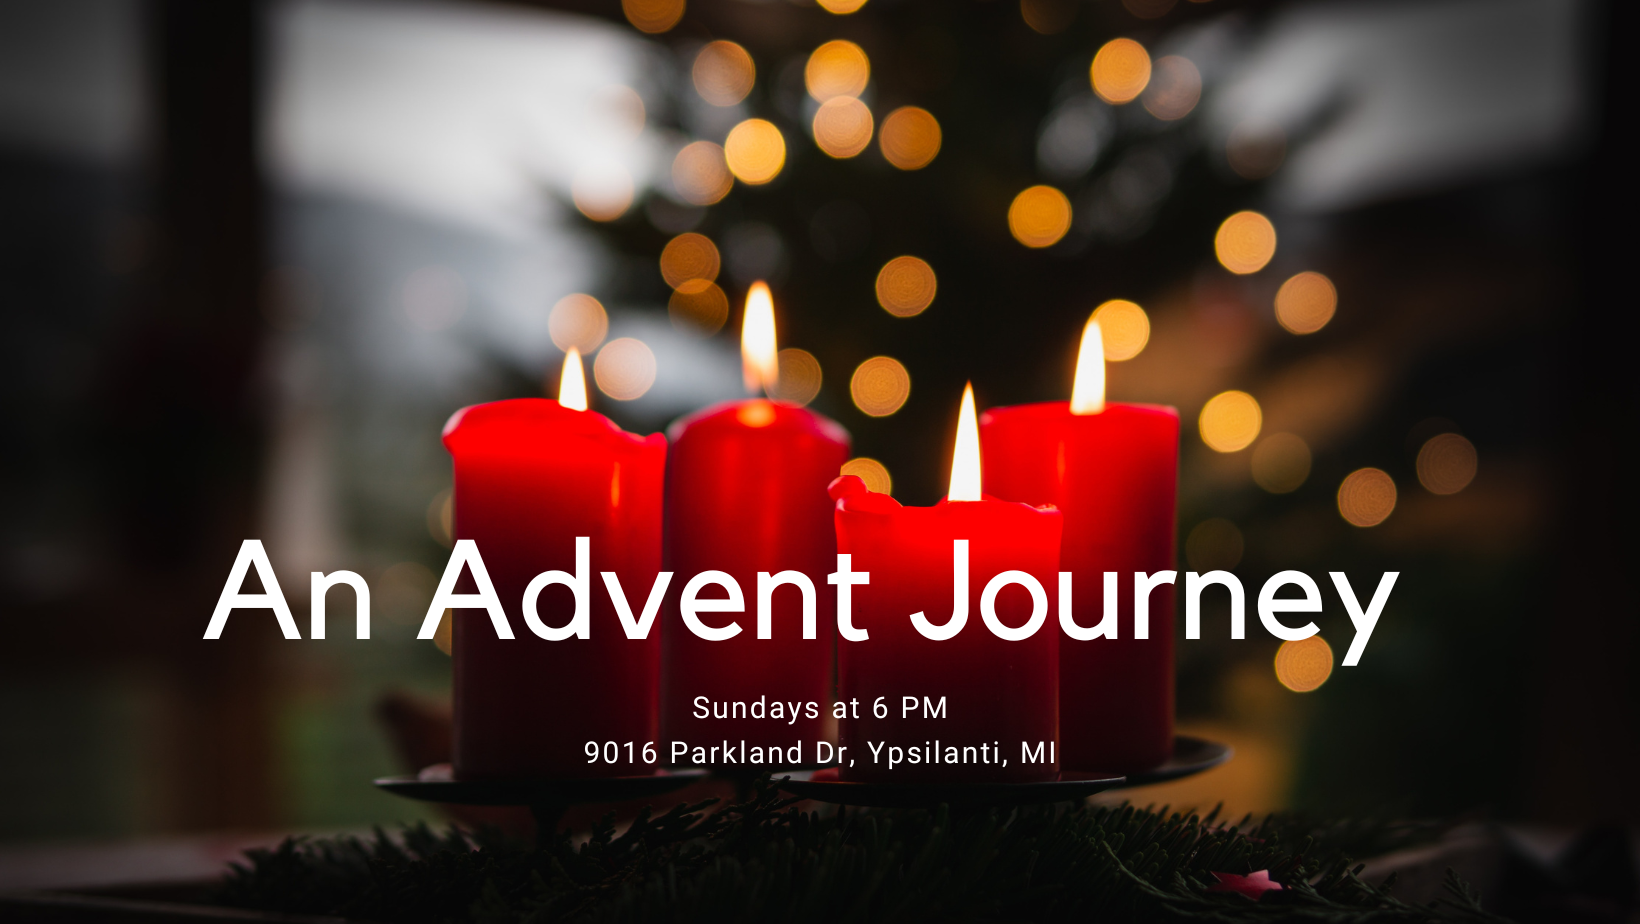 Advent Journey: A Time for Joy